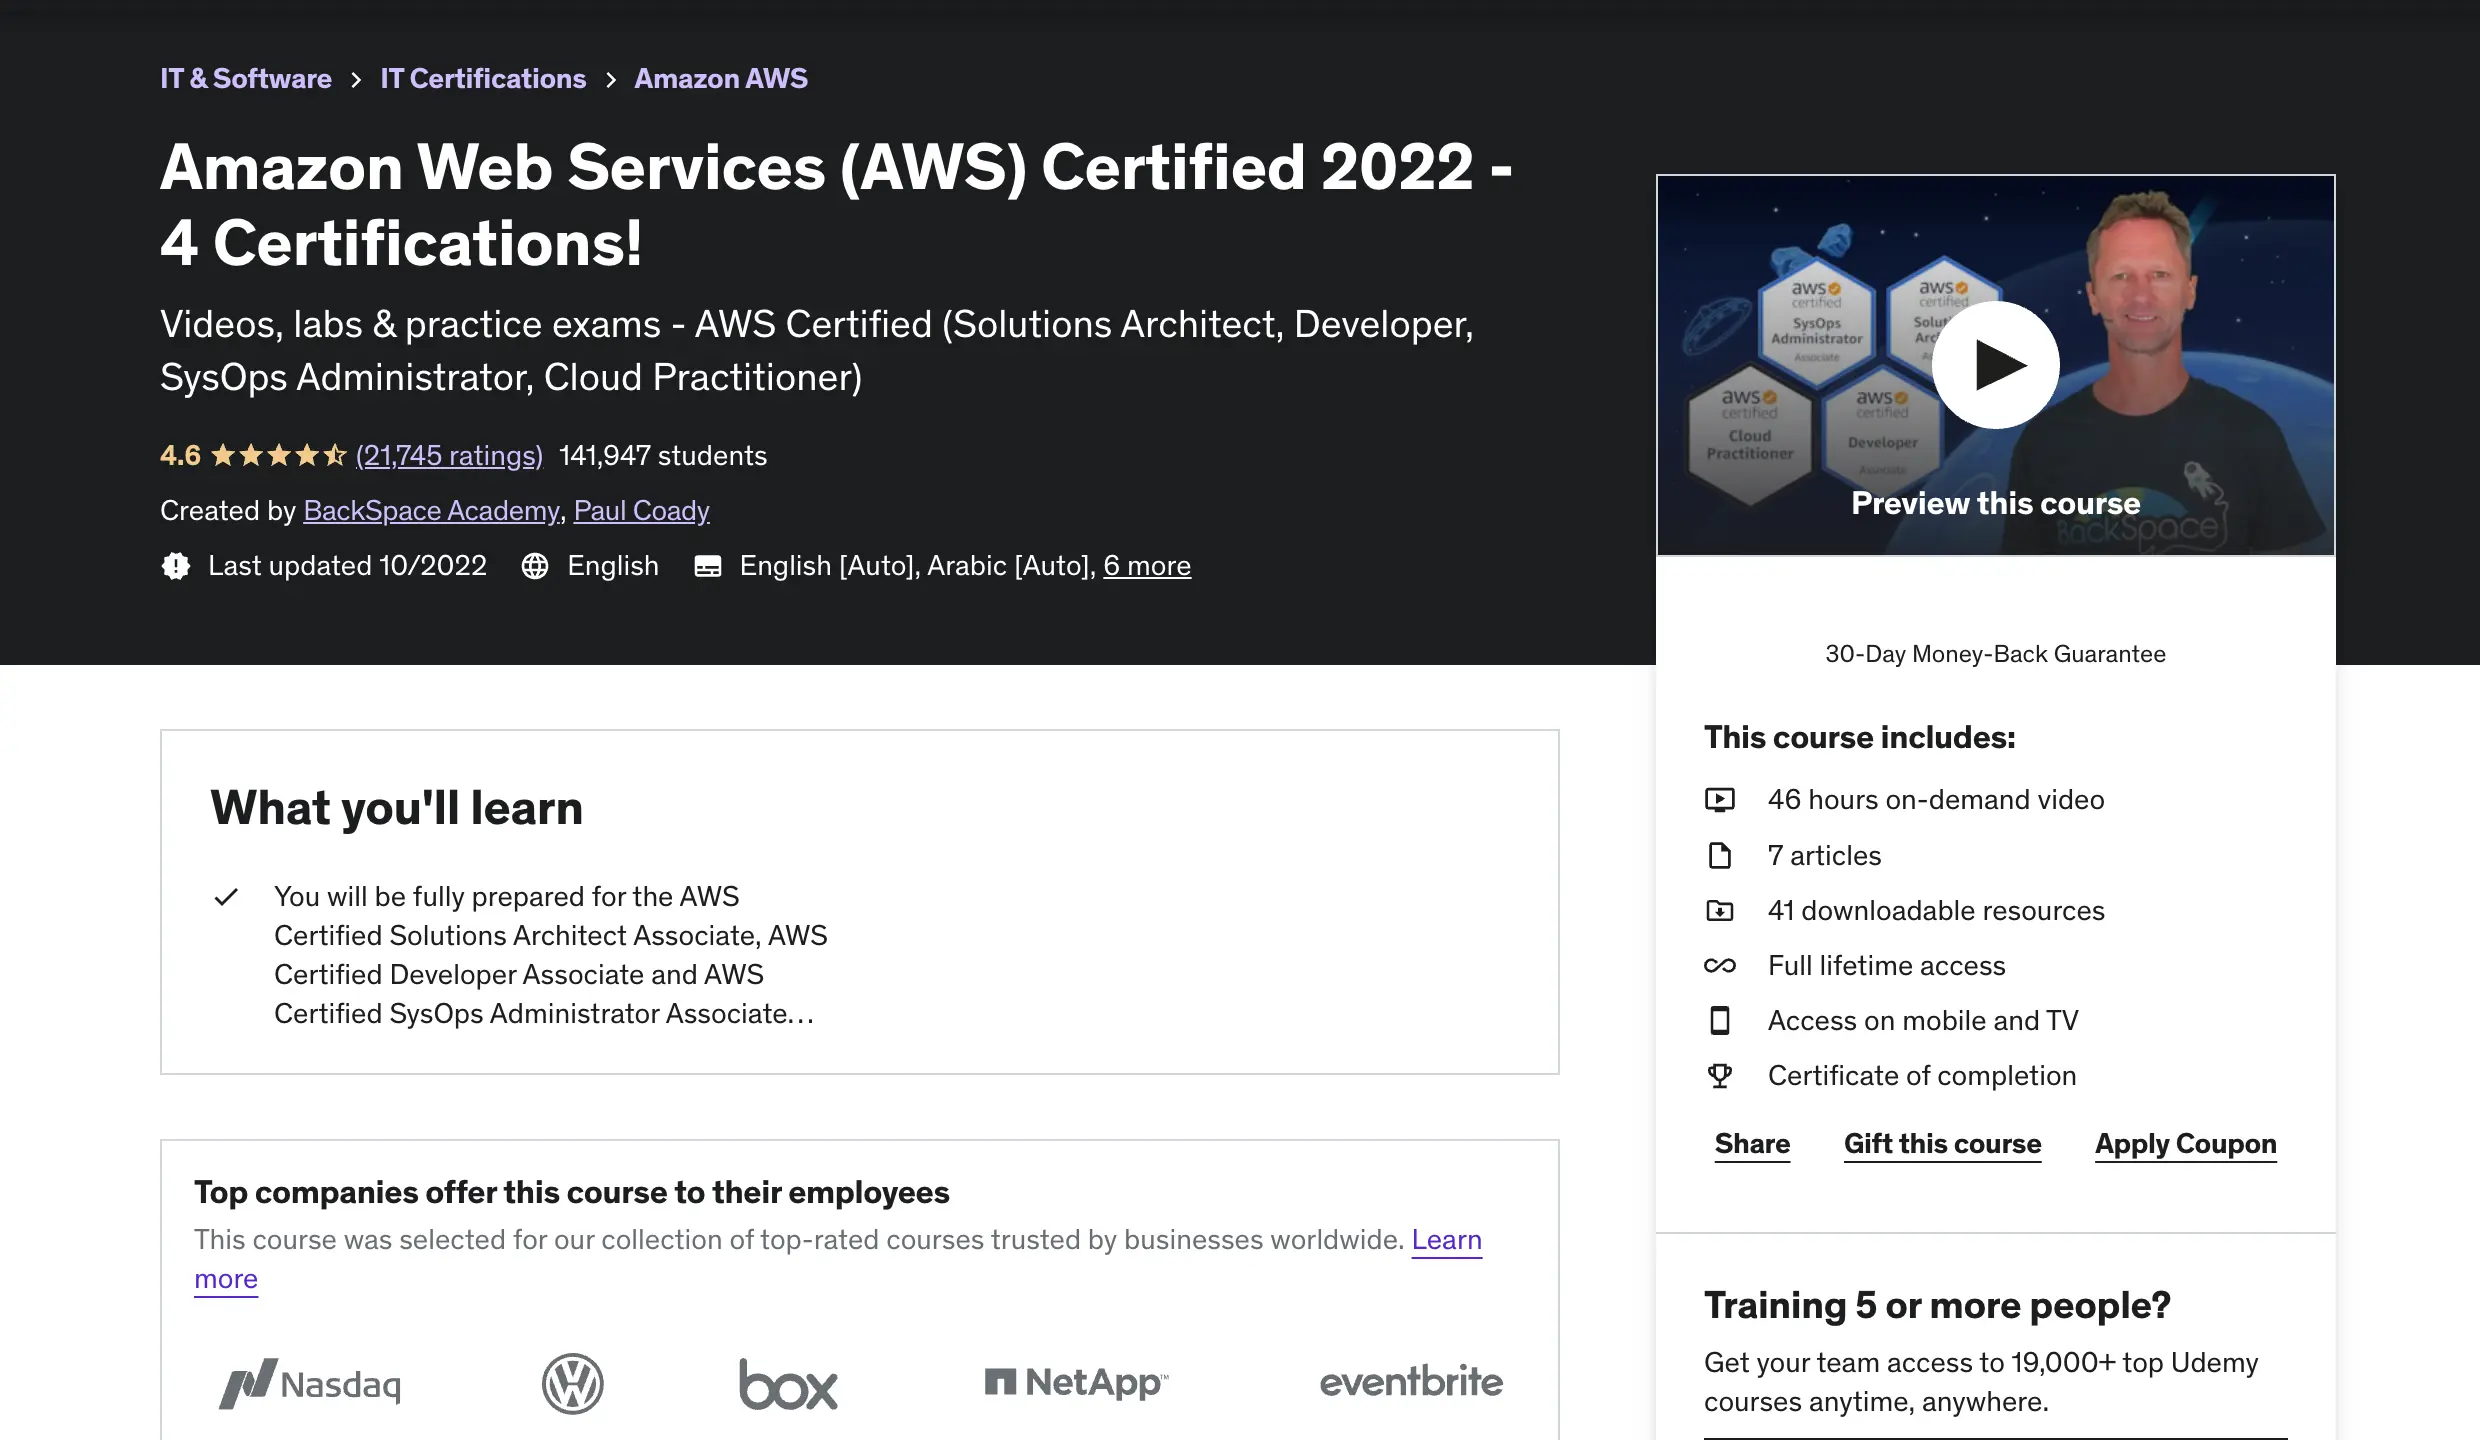 Amazon Web Services (AWS) Certified Course